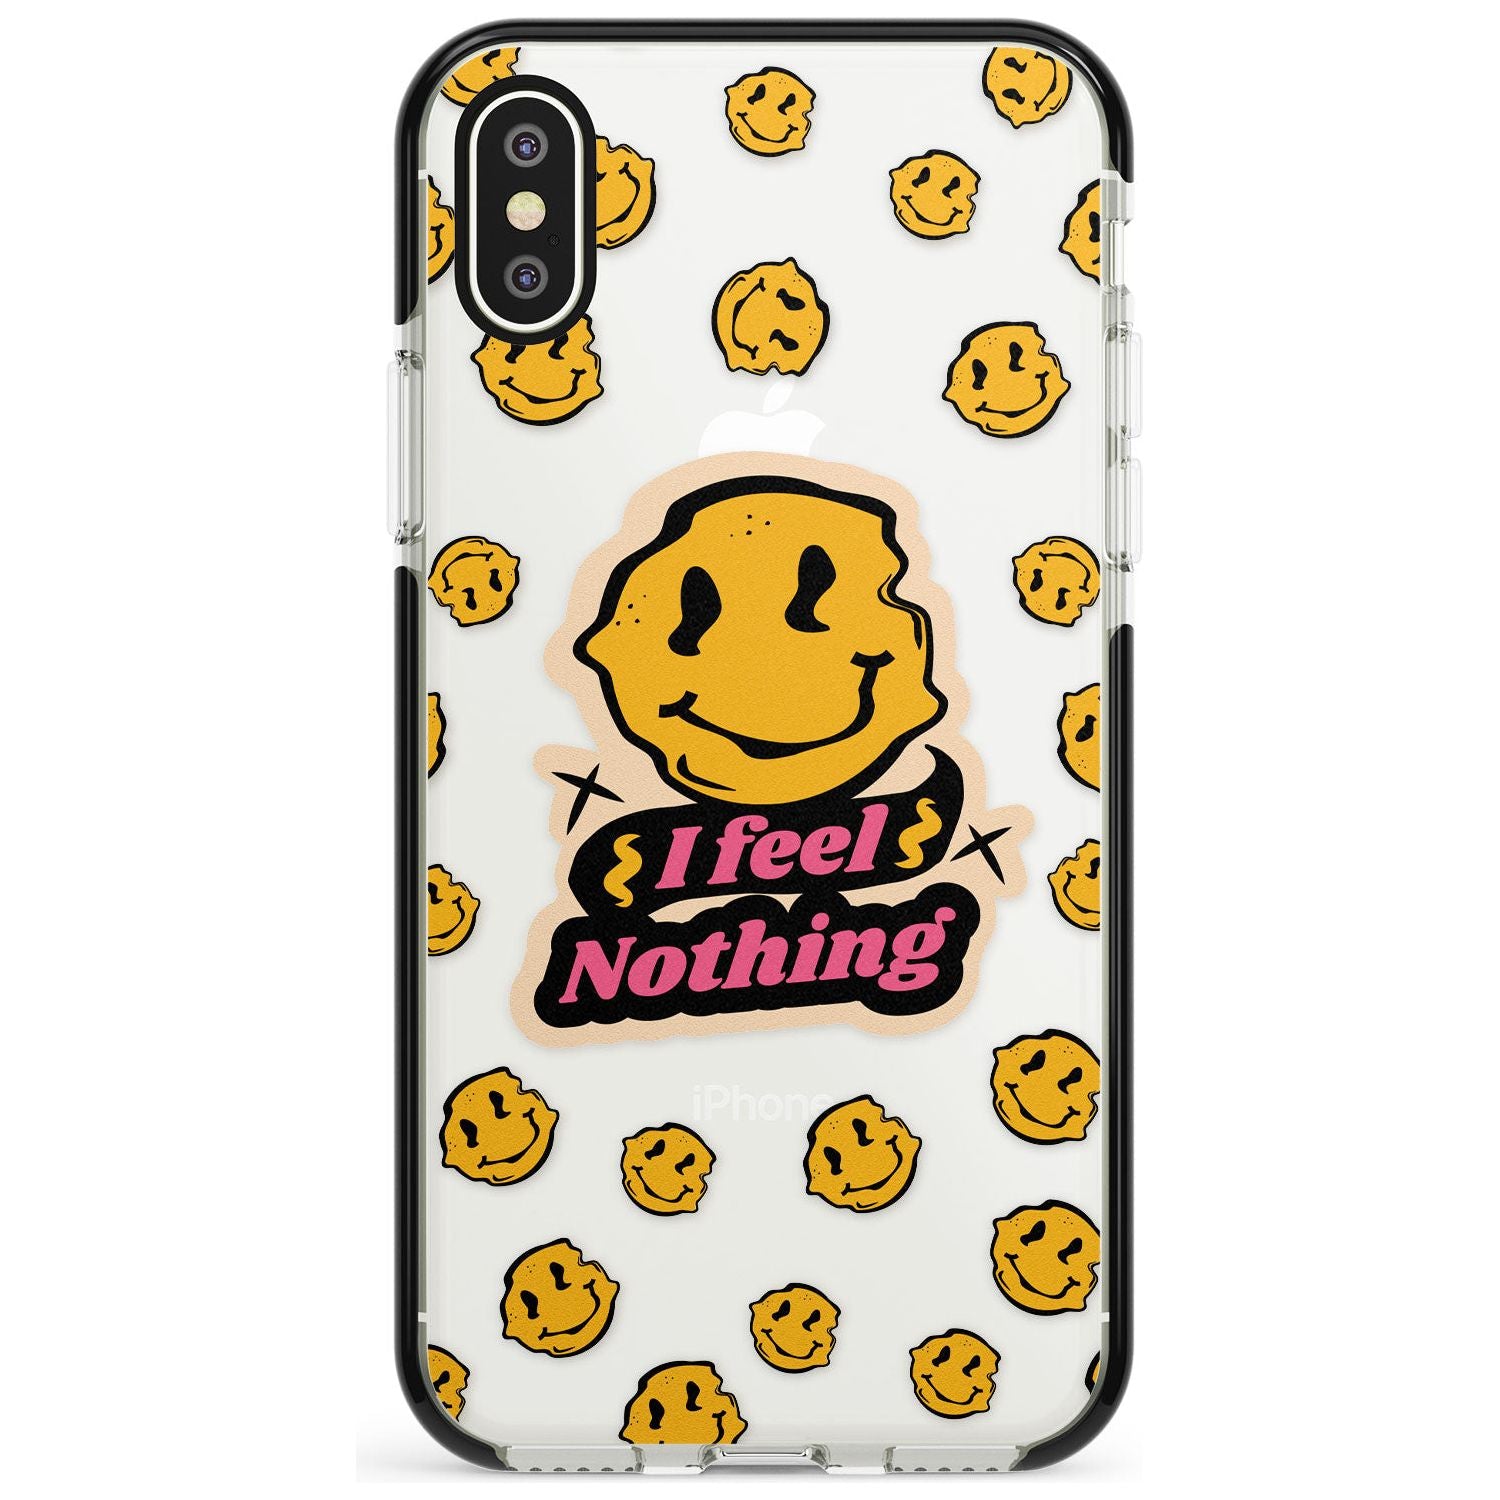 I feel nothing (Clear) Black Impact Phone Case for iPhone X XS Max XR